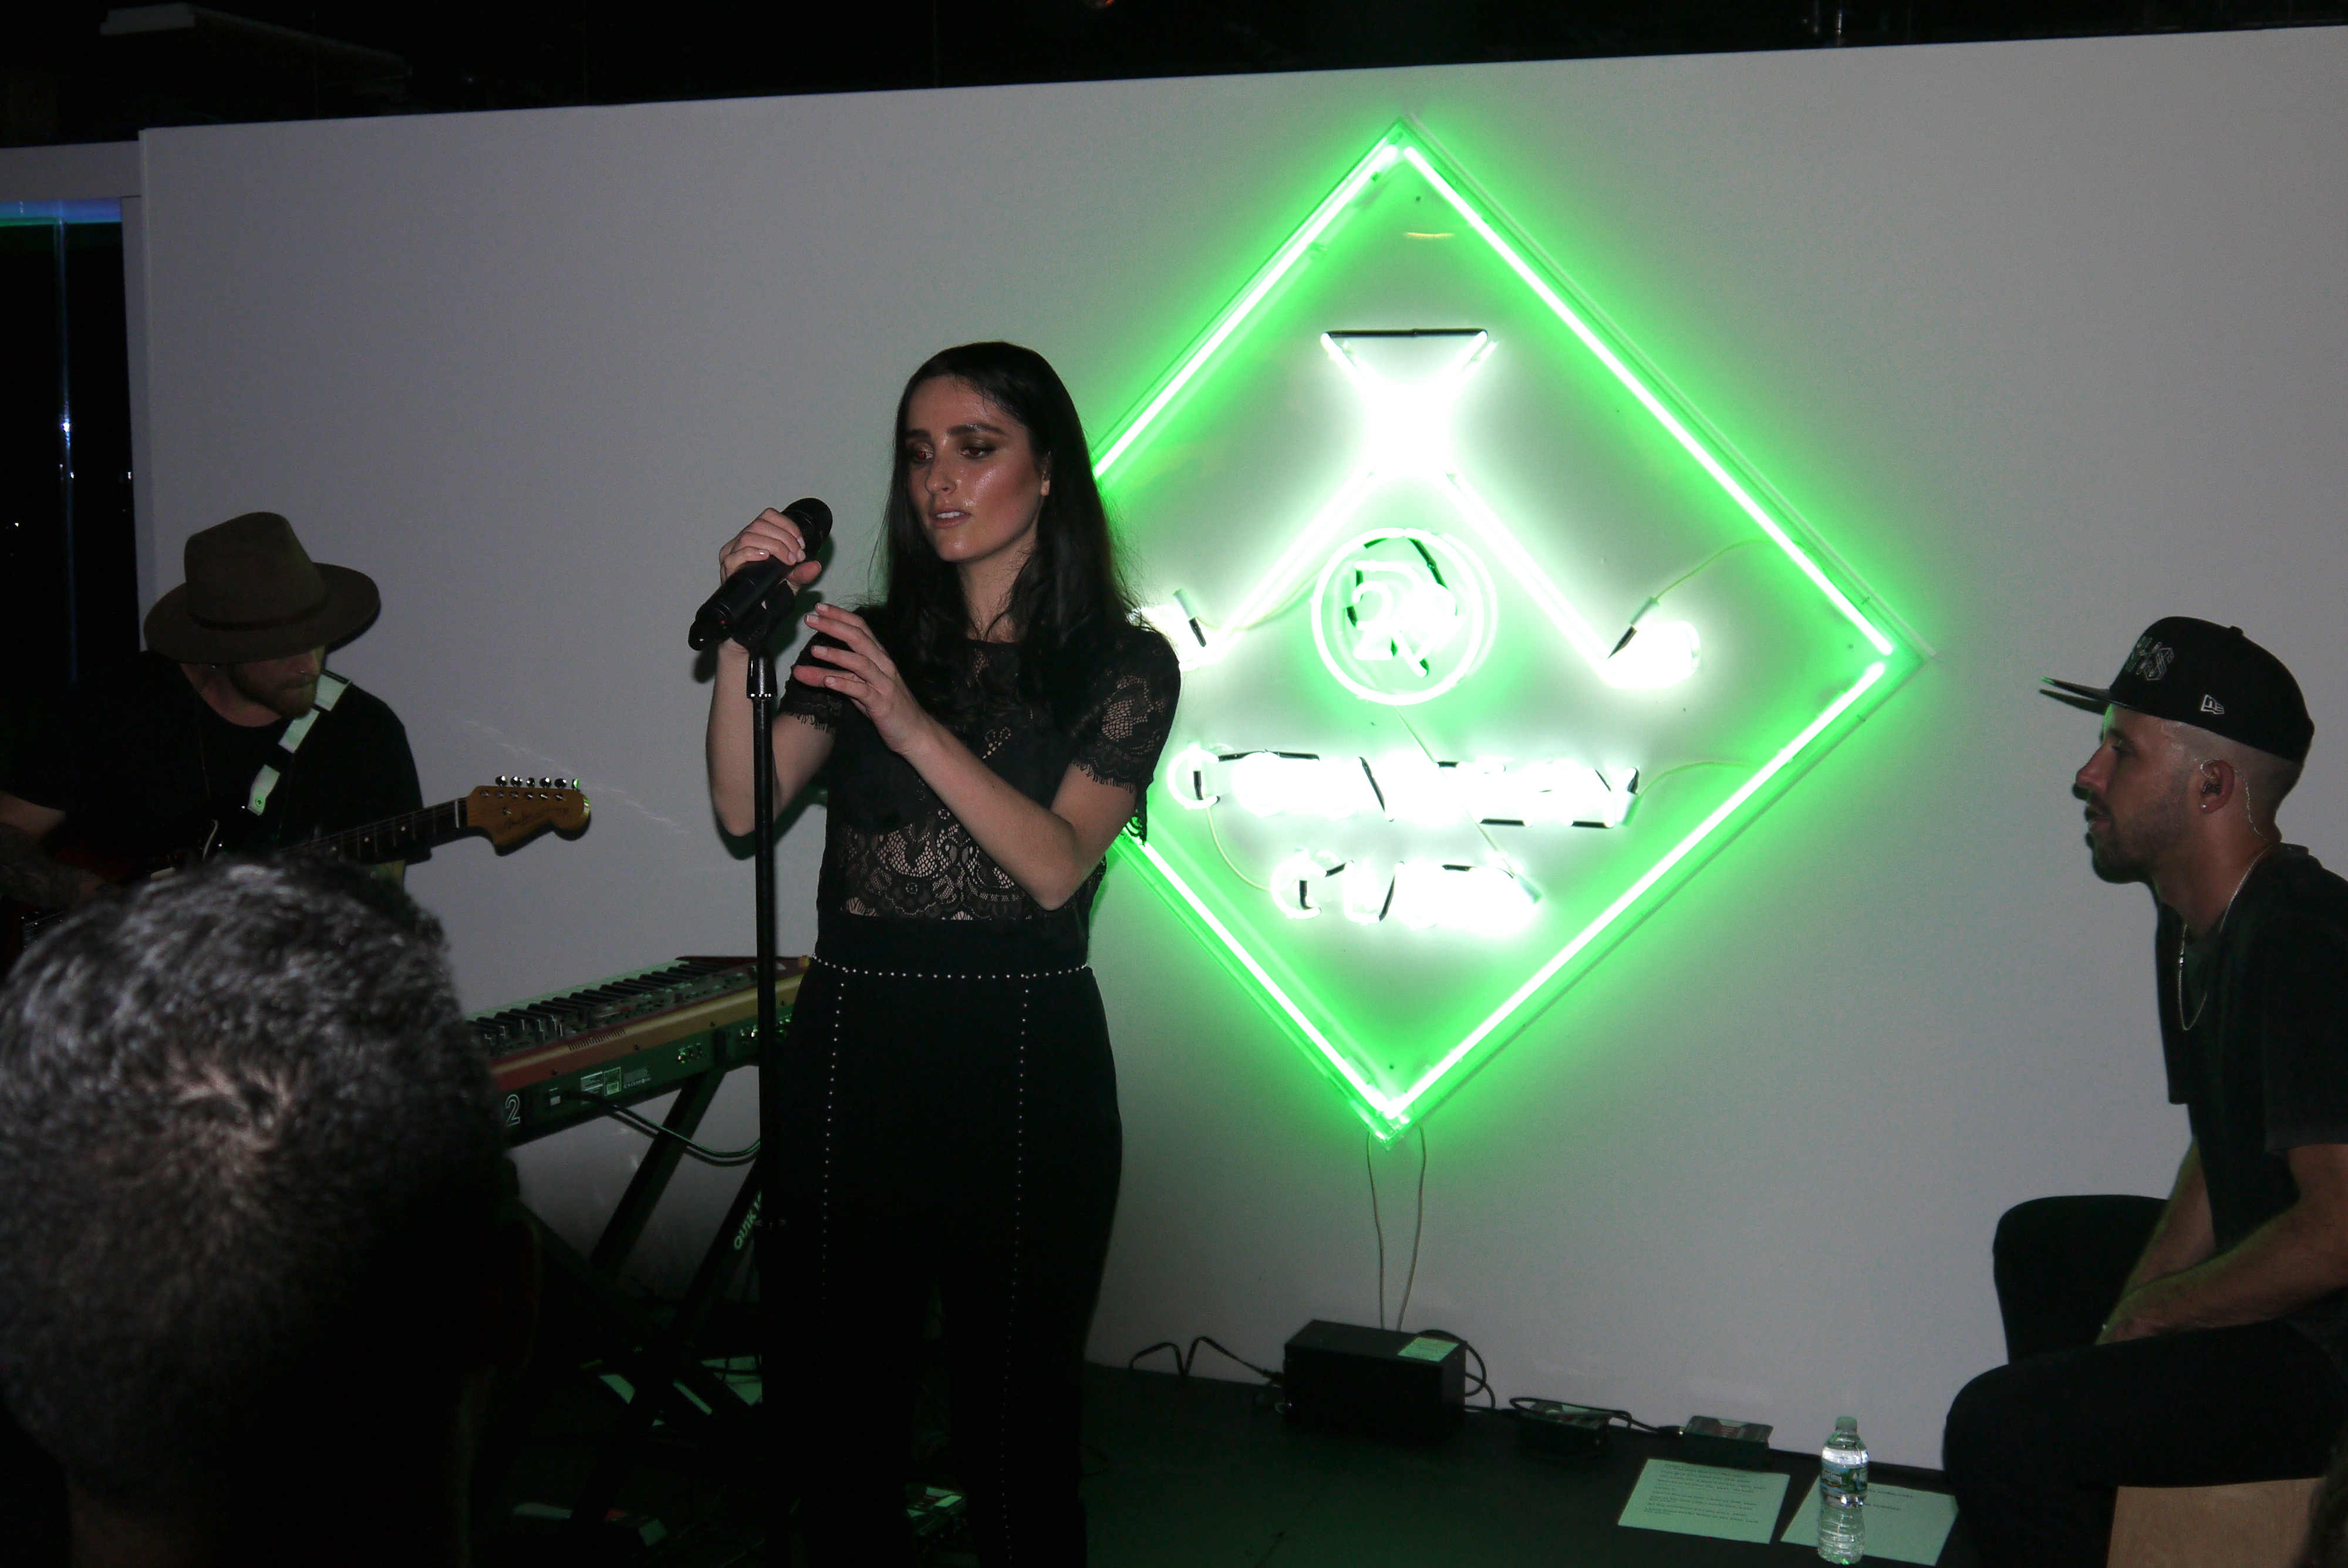 Banks performing at Refinery 29 party